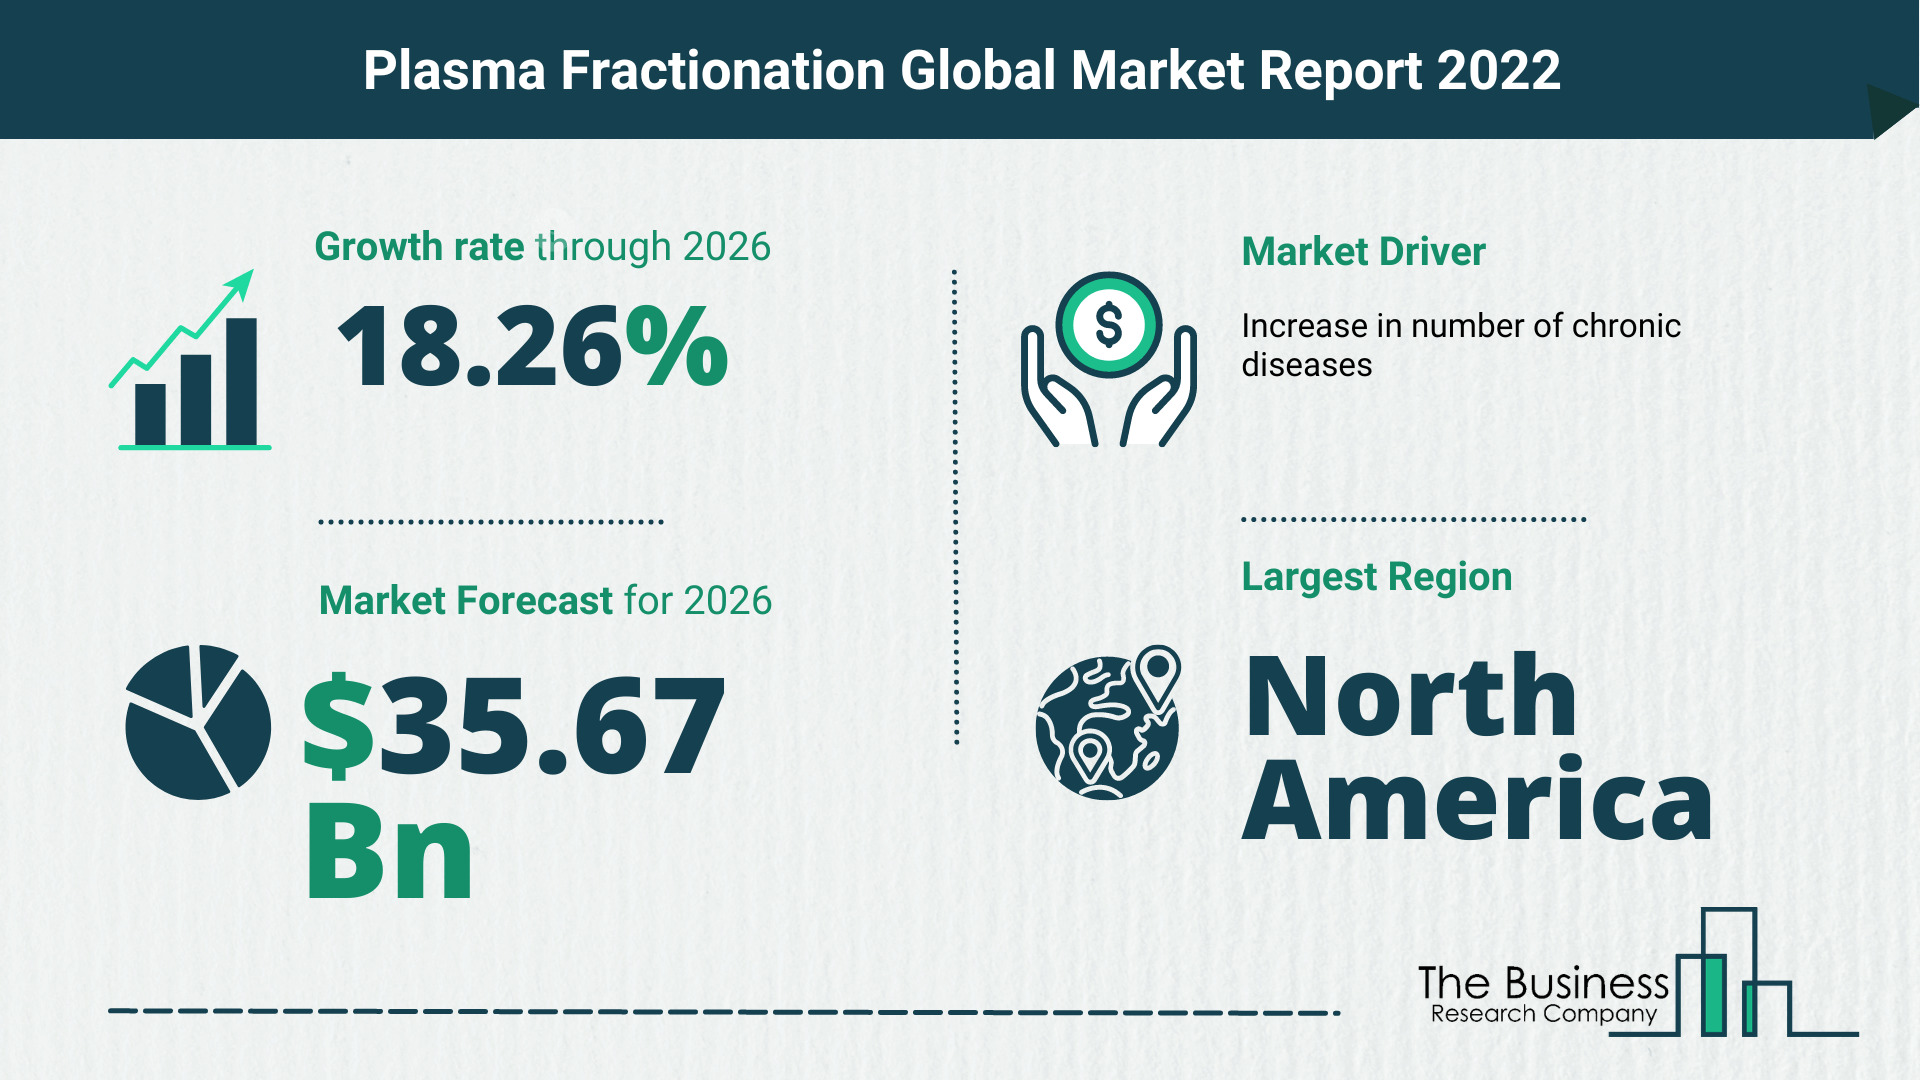 The Plasma Fractionation Market Share, Market Size, And Growth Rate 2022